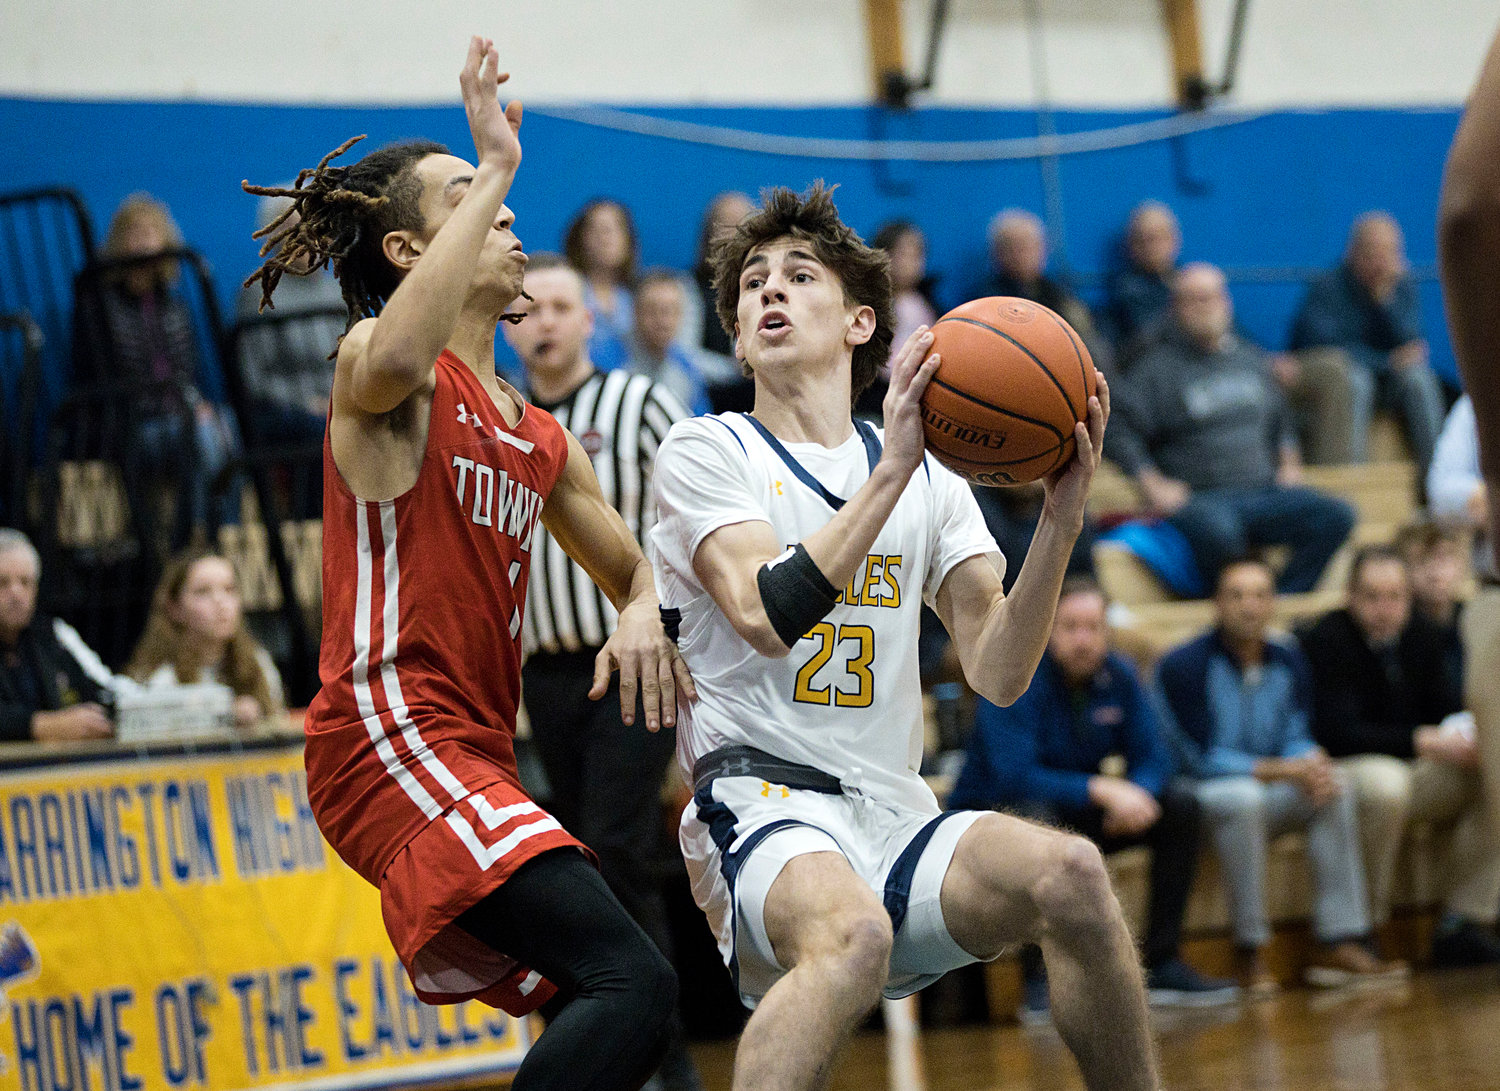 Matt Raffa eyes the hoop while pressured by an East Providence opponent.